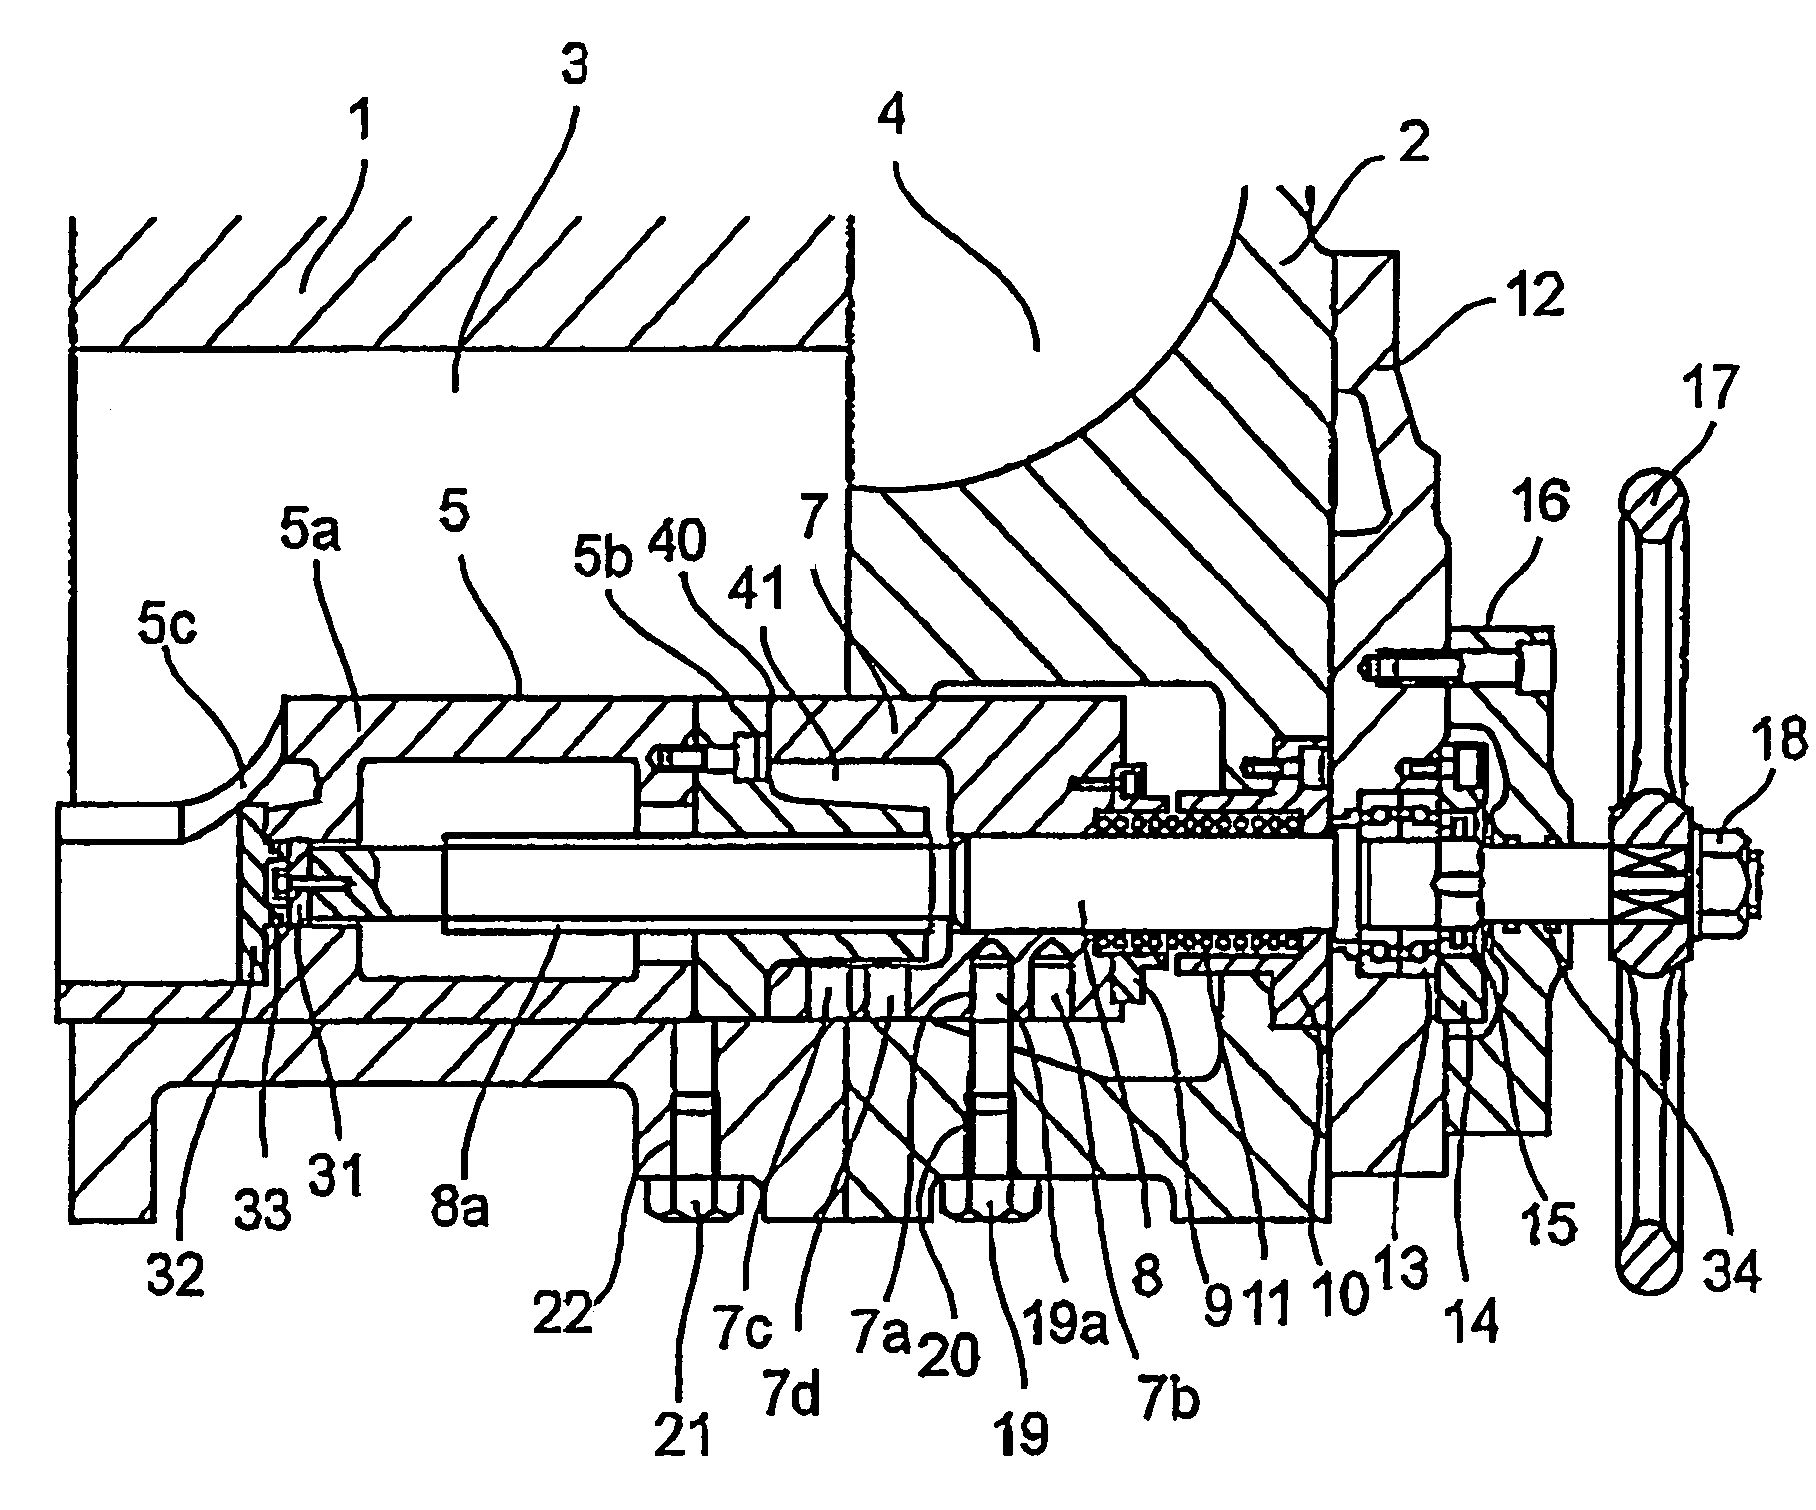 Screw compressor capable of manually adjusting both internal volume ratio and capacity and combined screw compressor unit accommodating variation in suction or discharge pressure